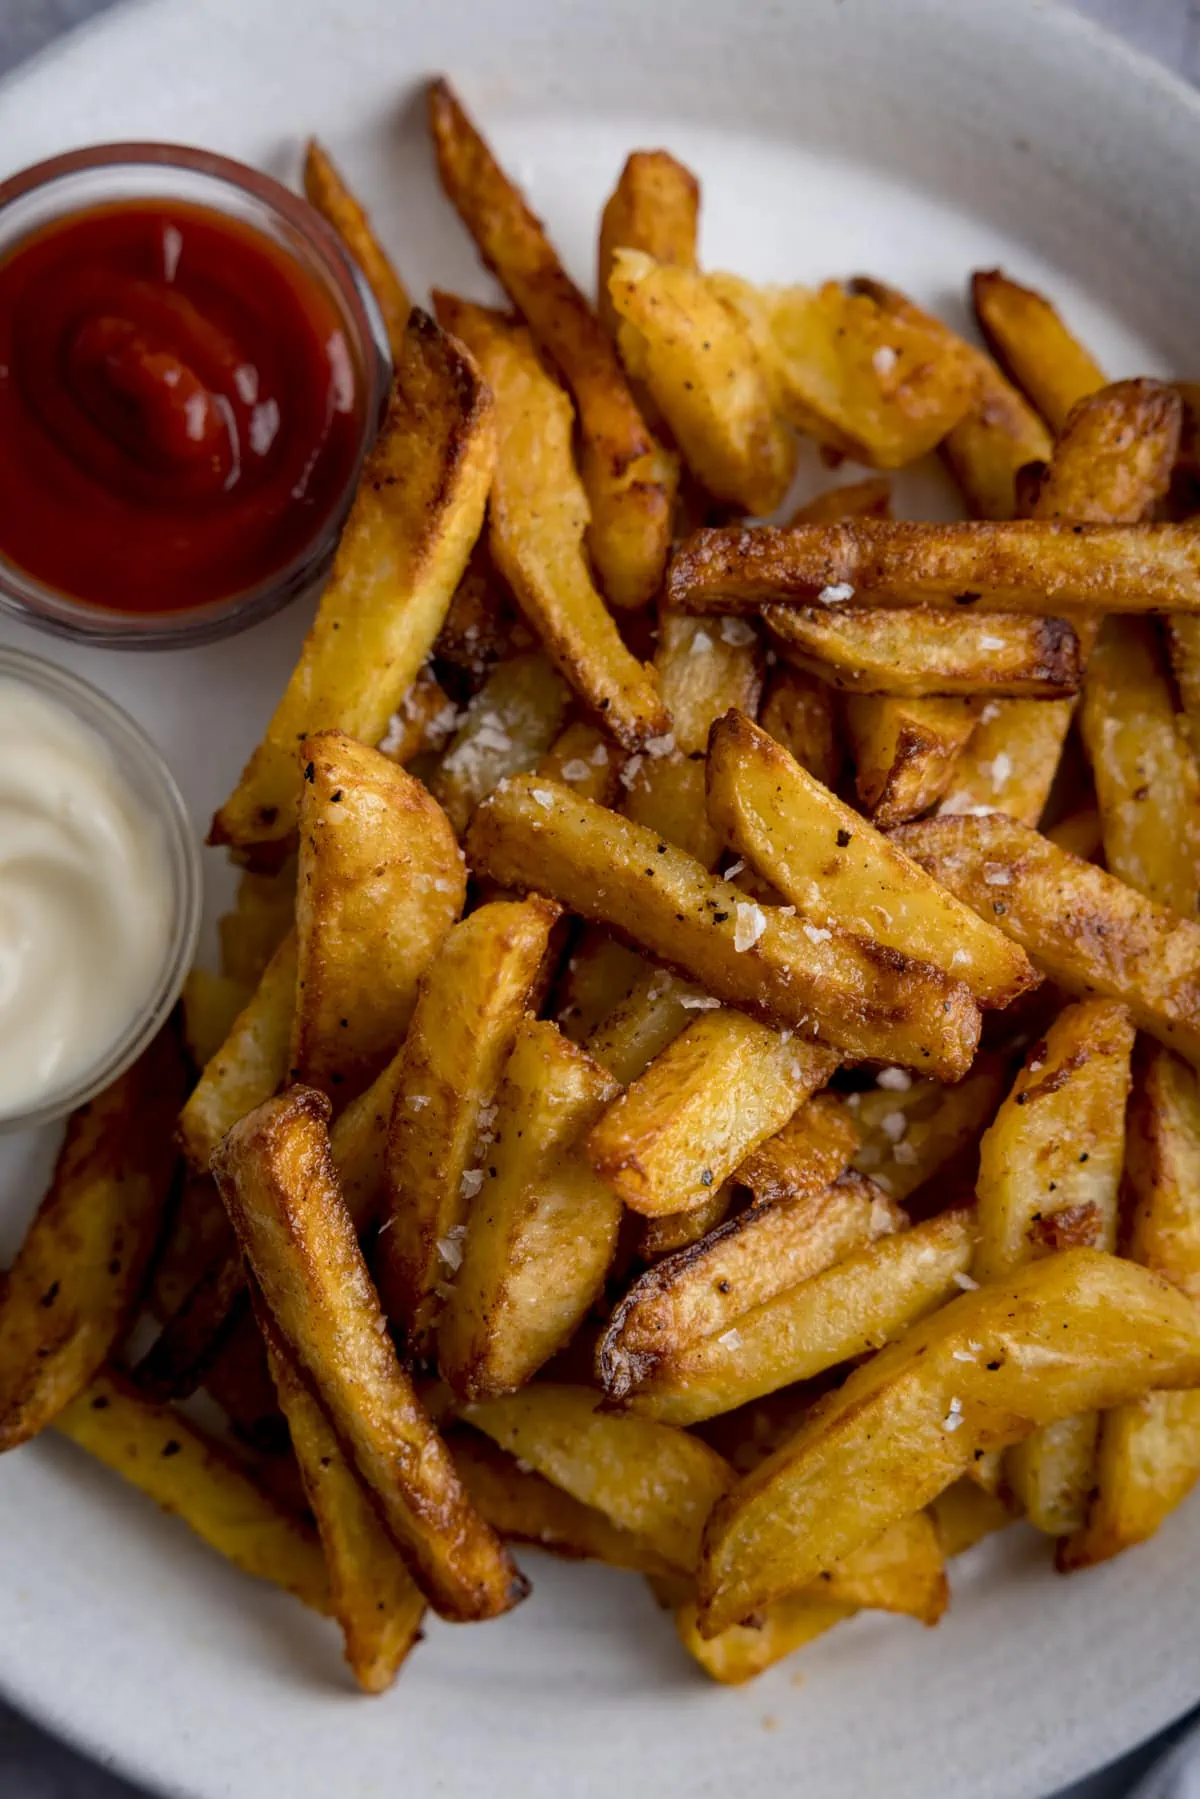 Put a Little Spice in Your Life, Starting with Your Fries!